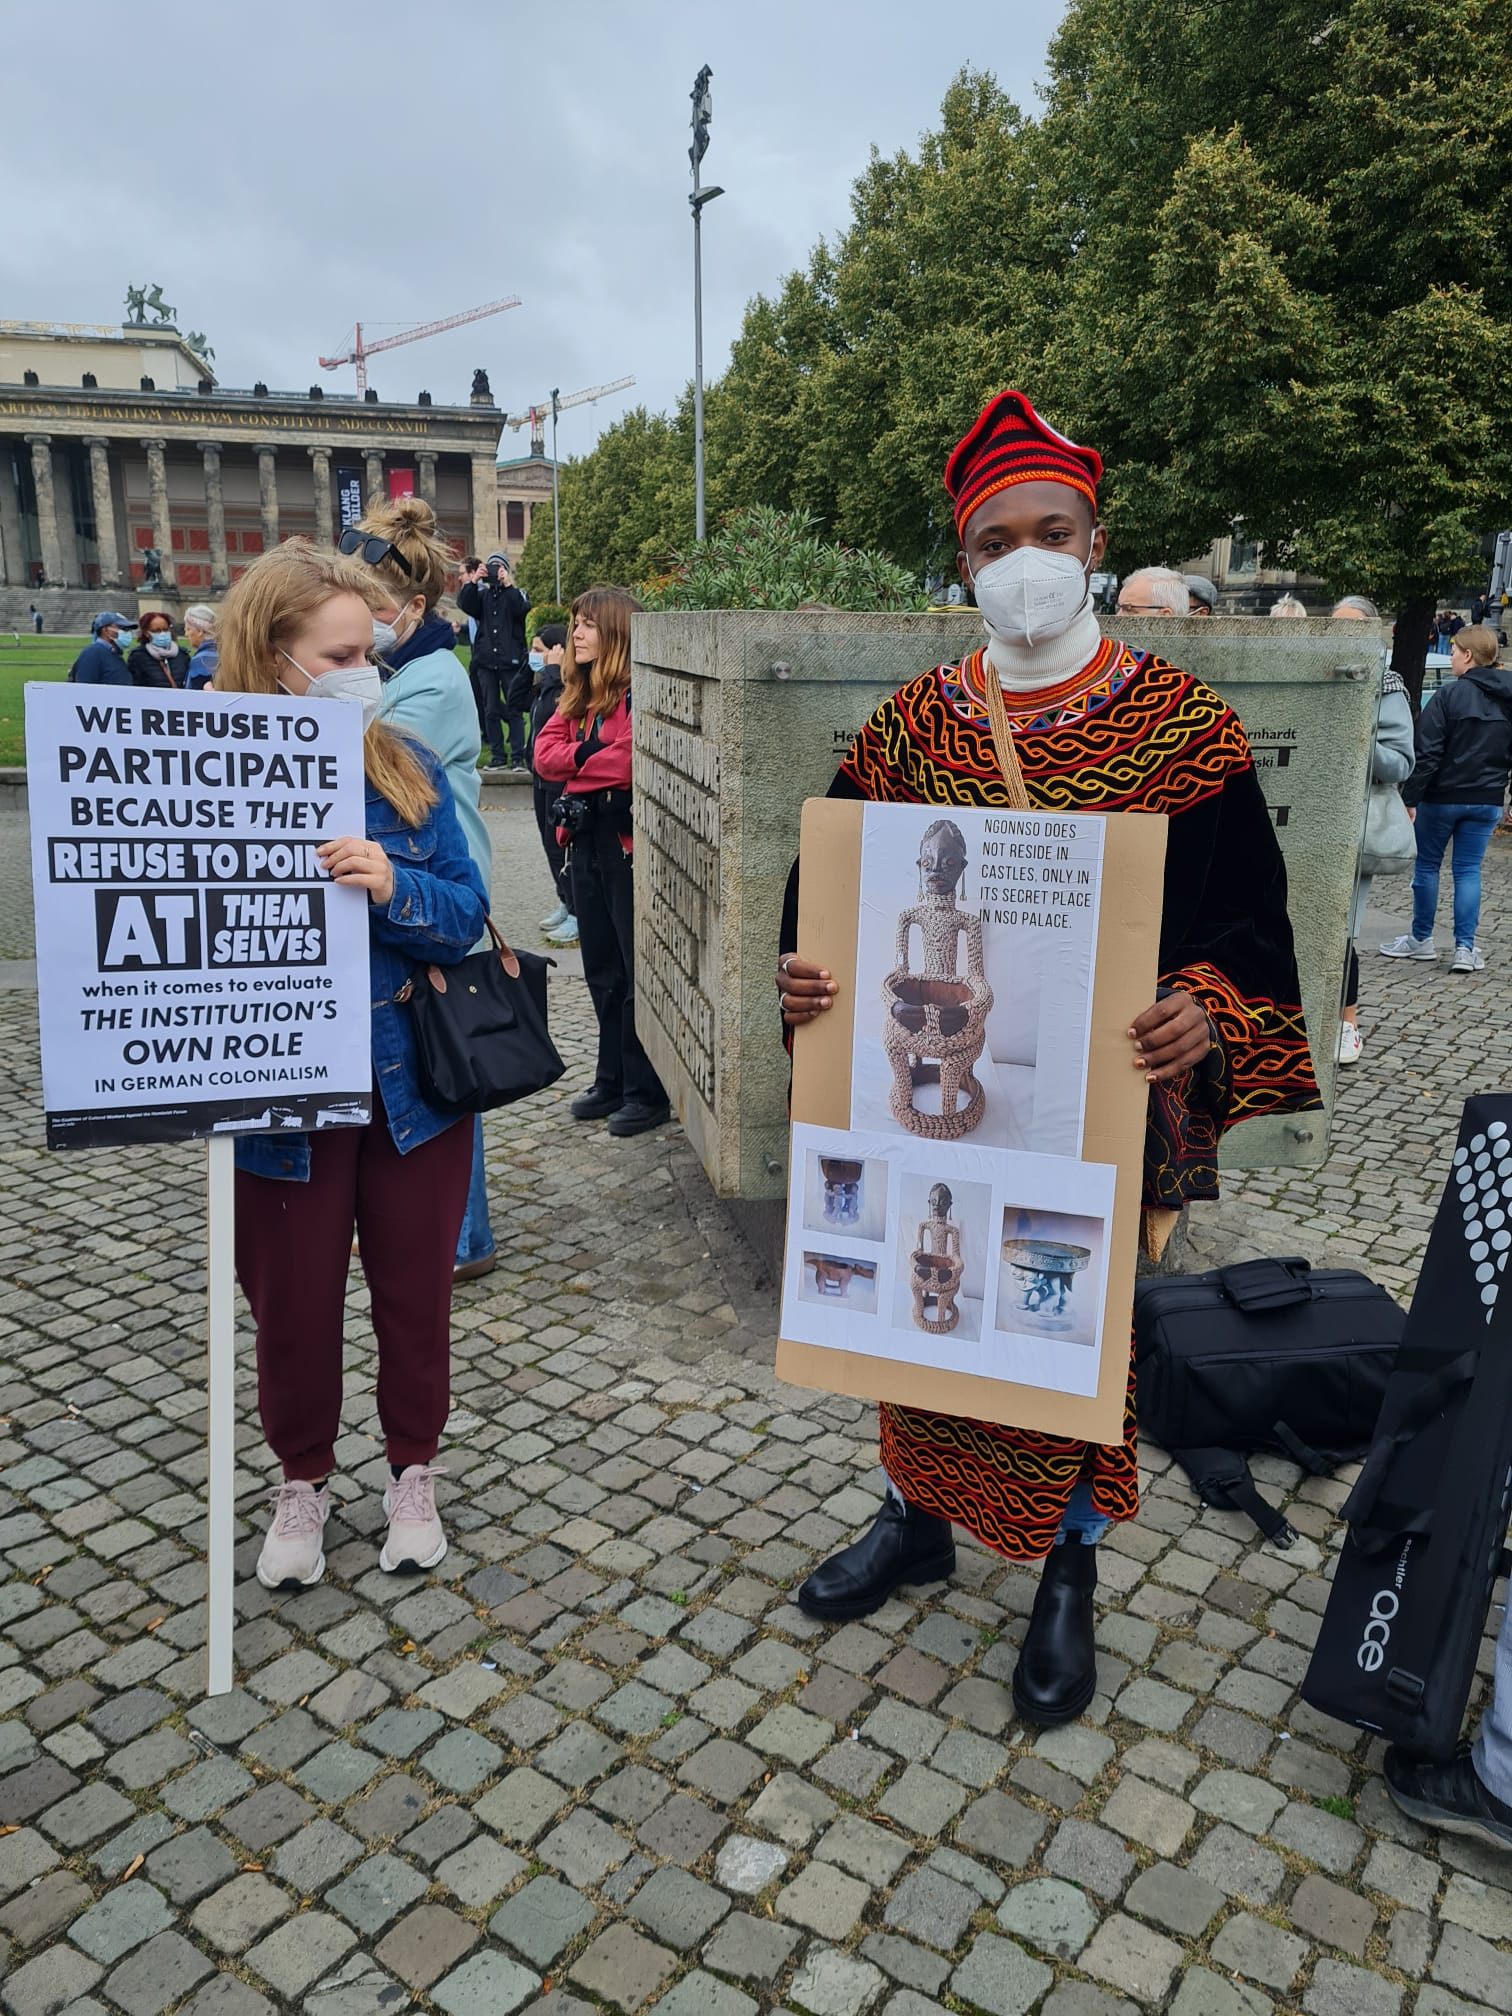 Cornelius and Anniker Maurer protest in front of the Humboldt Forum.